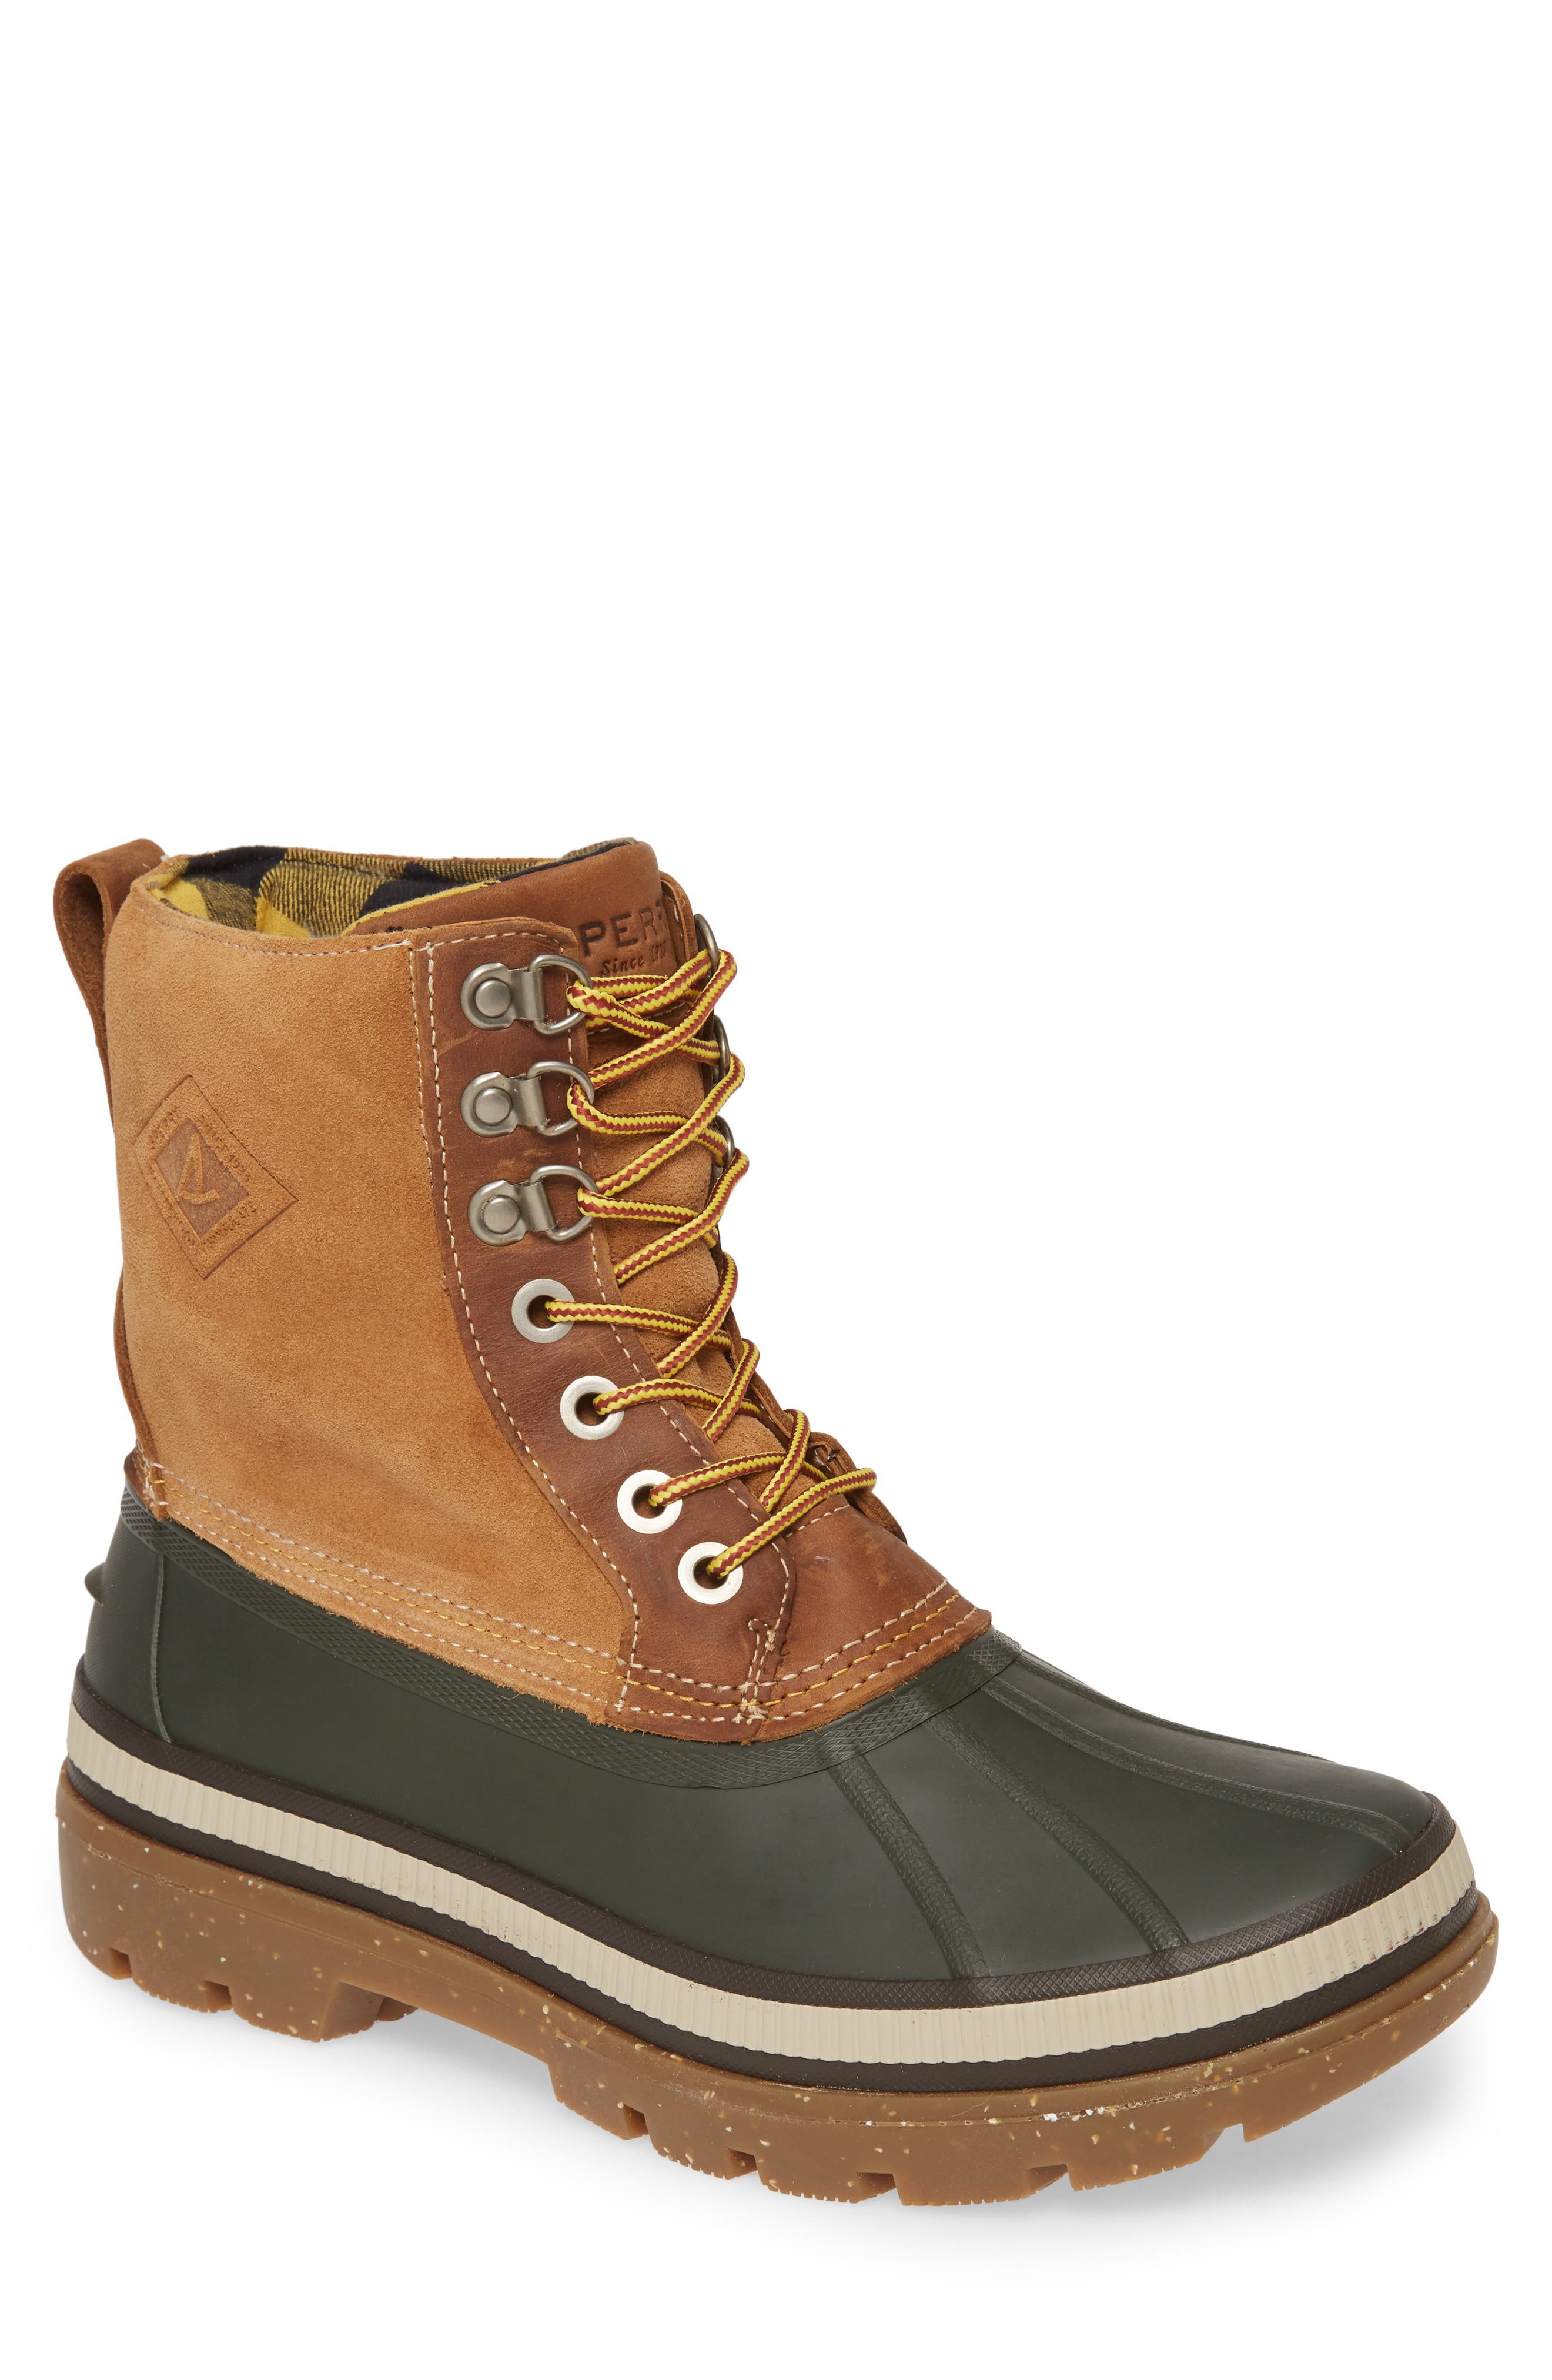 sperry snow boots mens